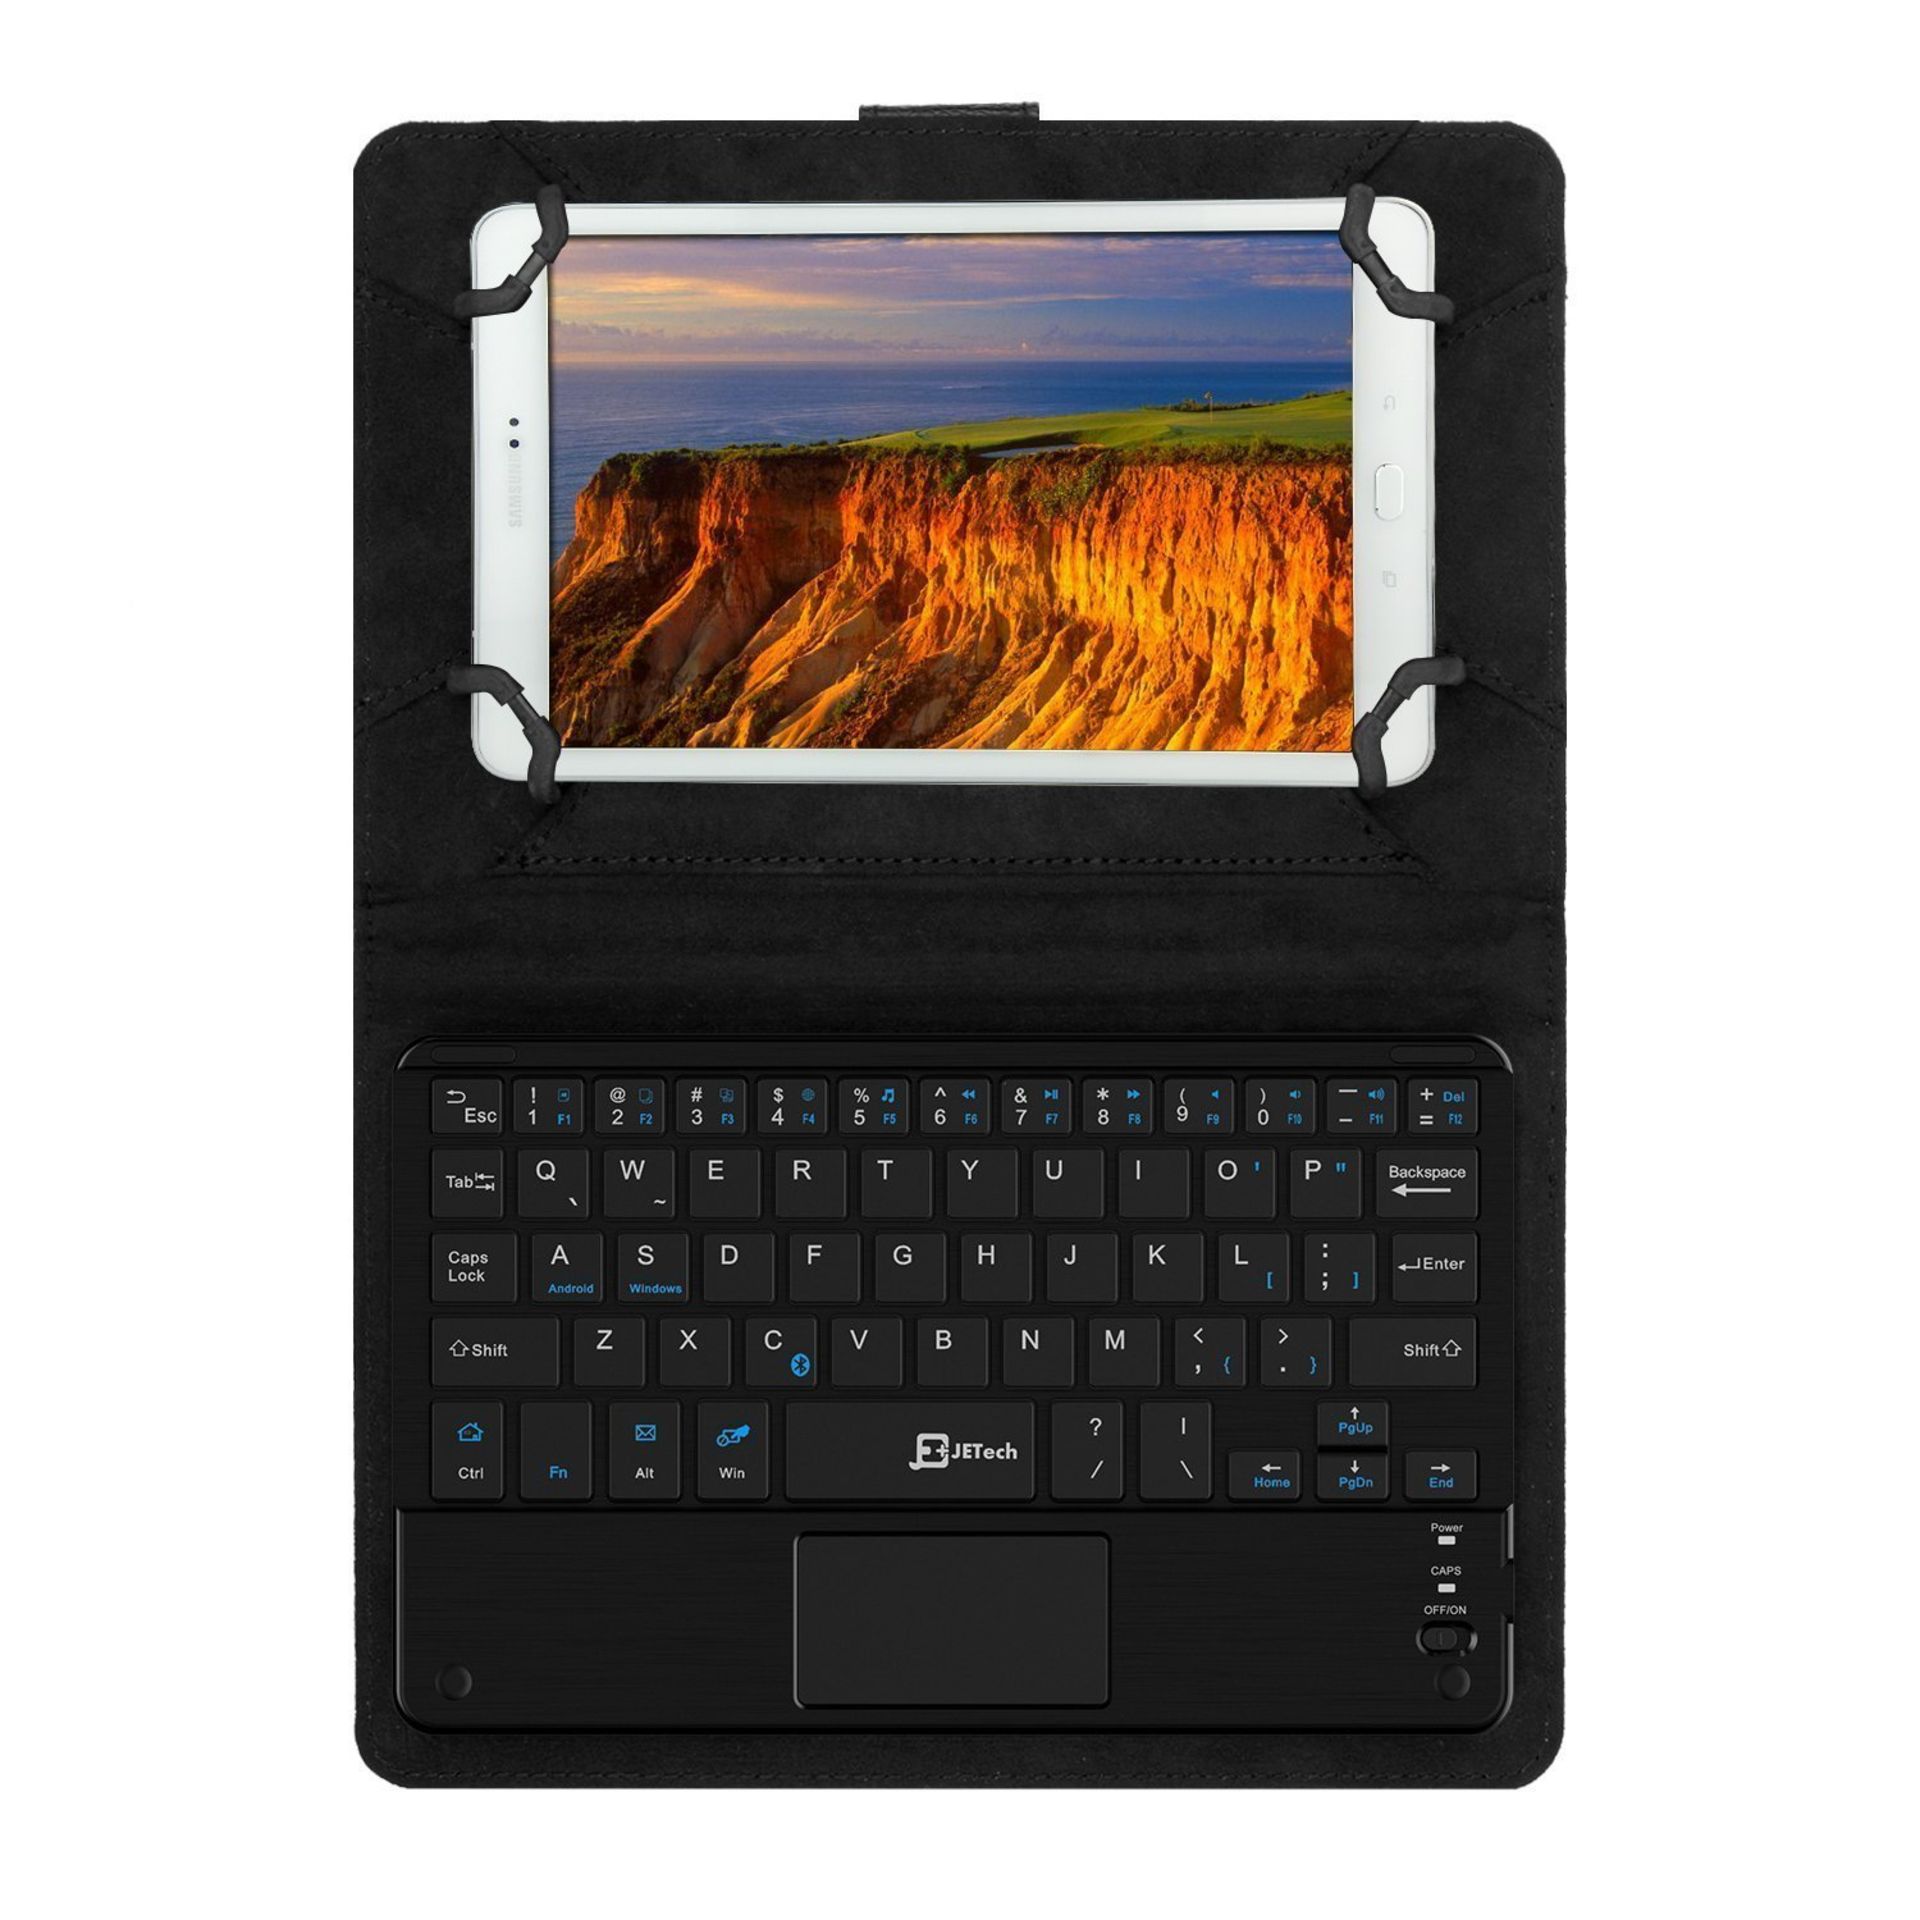 V Brand New Leather Bluetooth Keyboard Case For A Samsung 7-8" Tablet Amazon Price £14.95